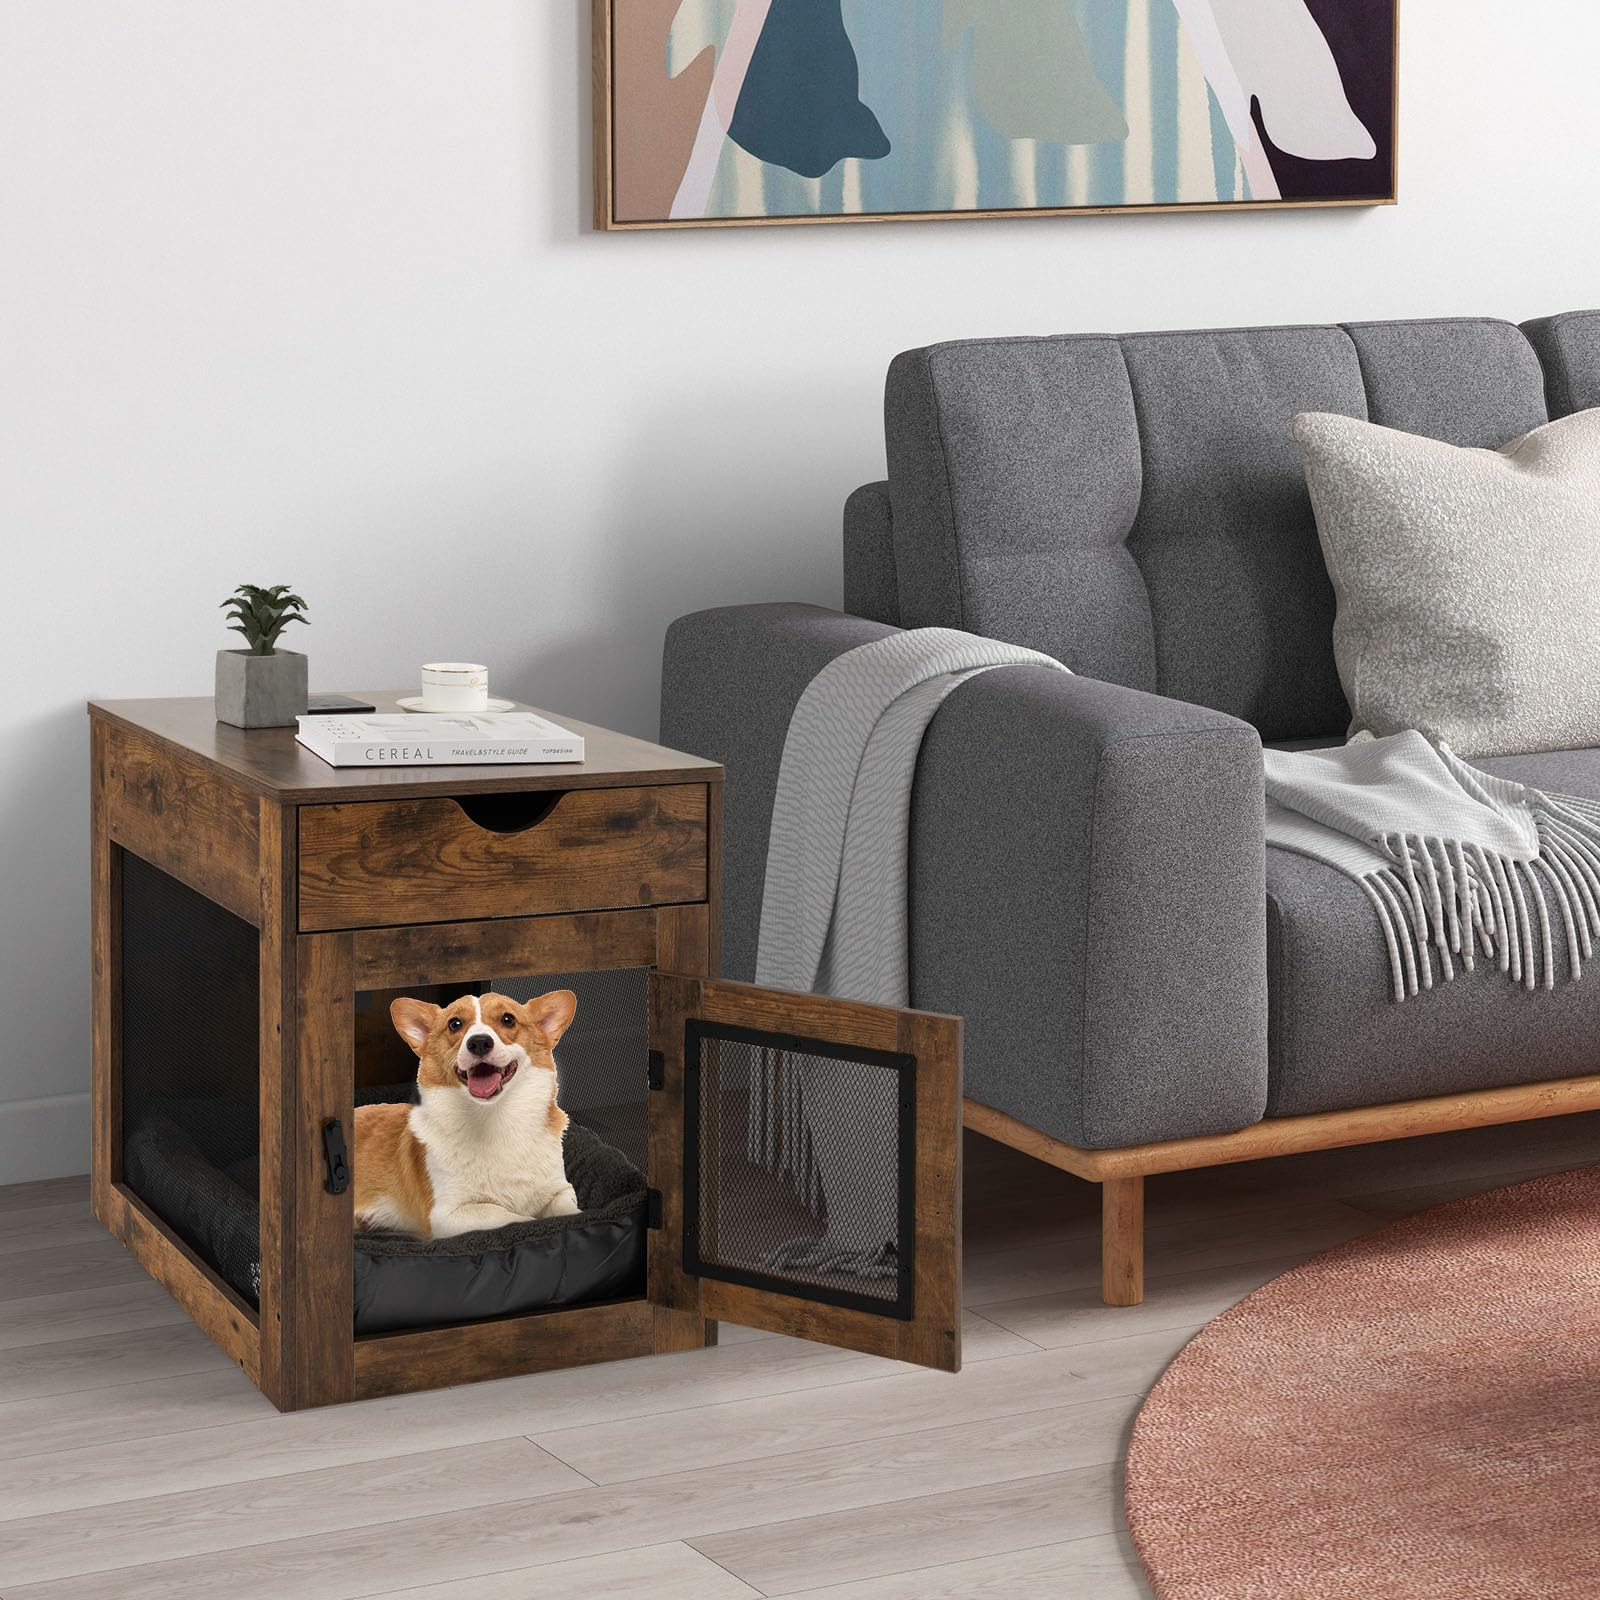 Giantex Dog Crate Side Table - Wooden Dog Kennel with Removable Cushion (Wood Color)